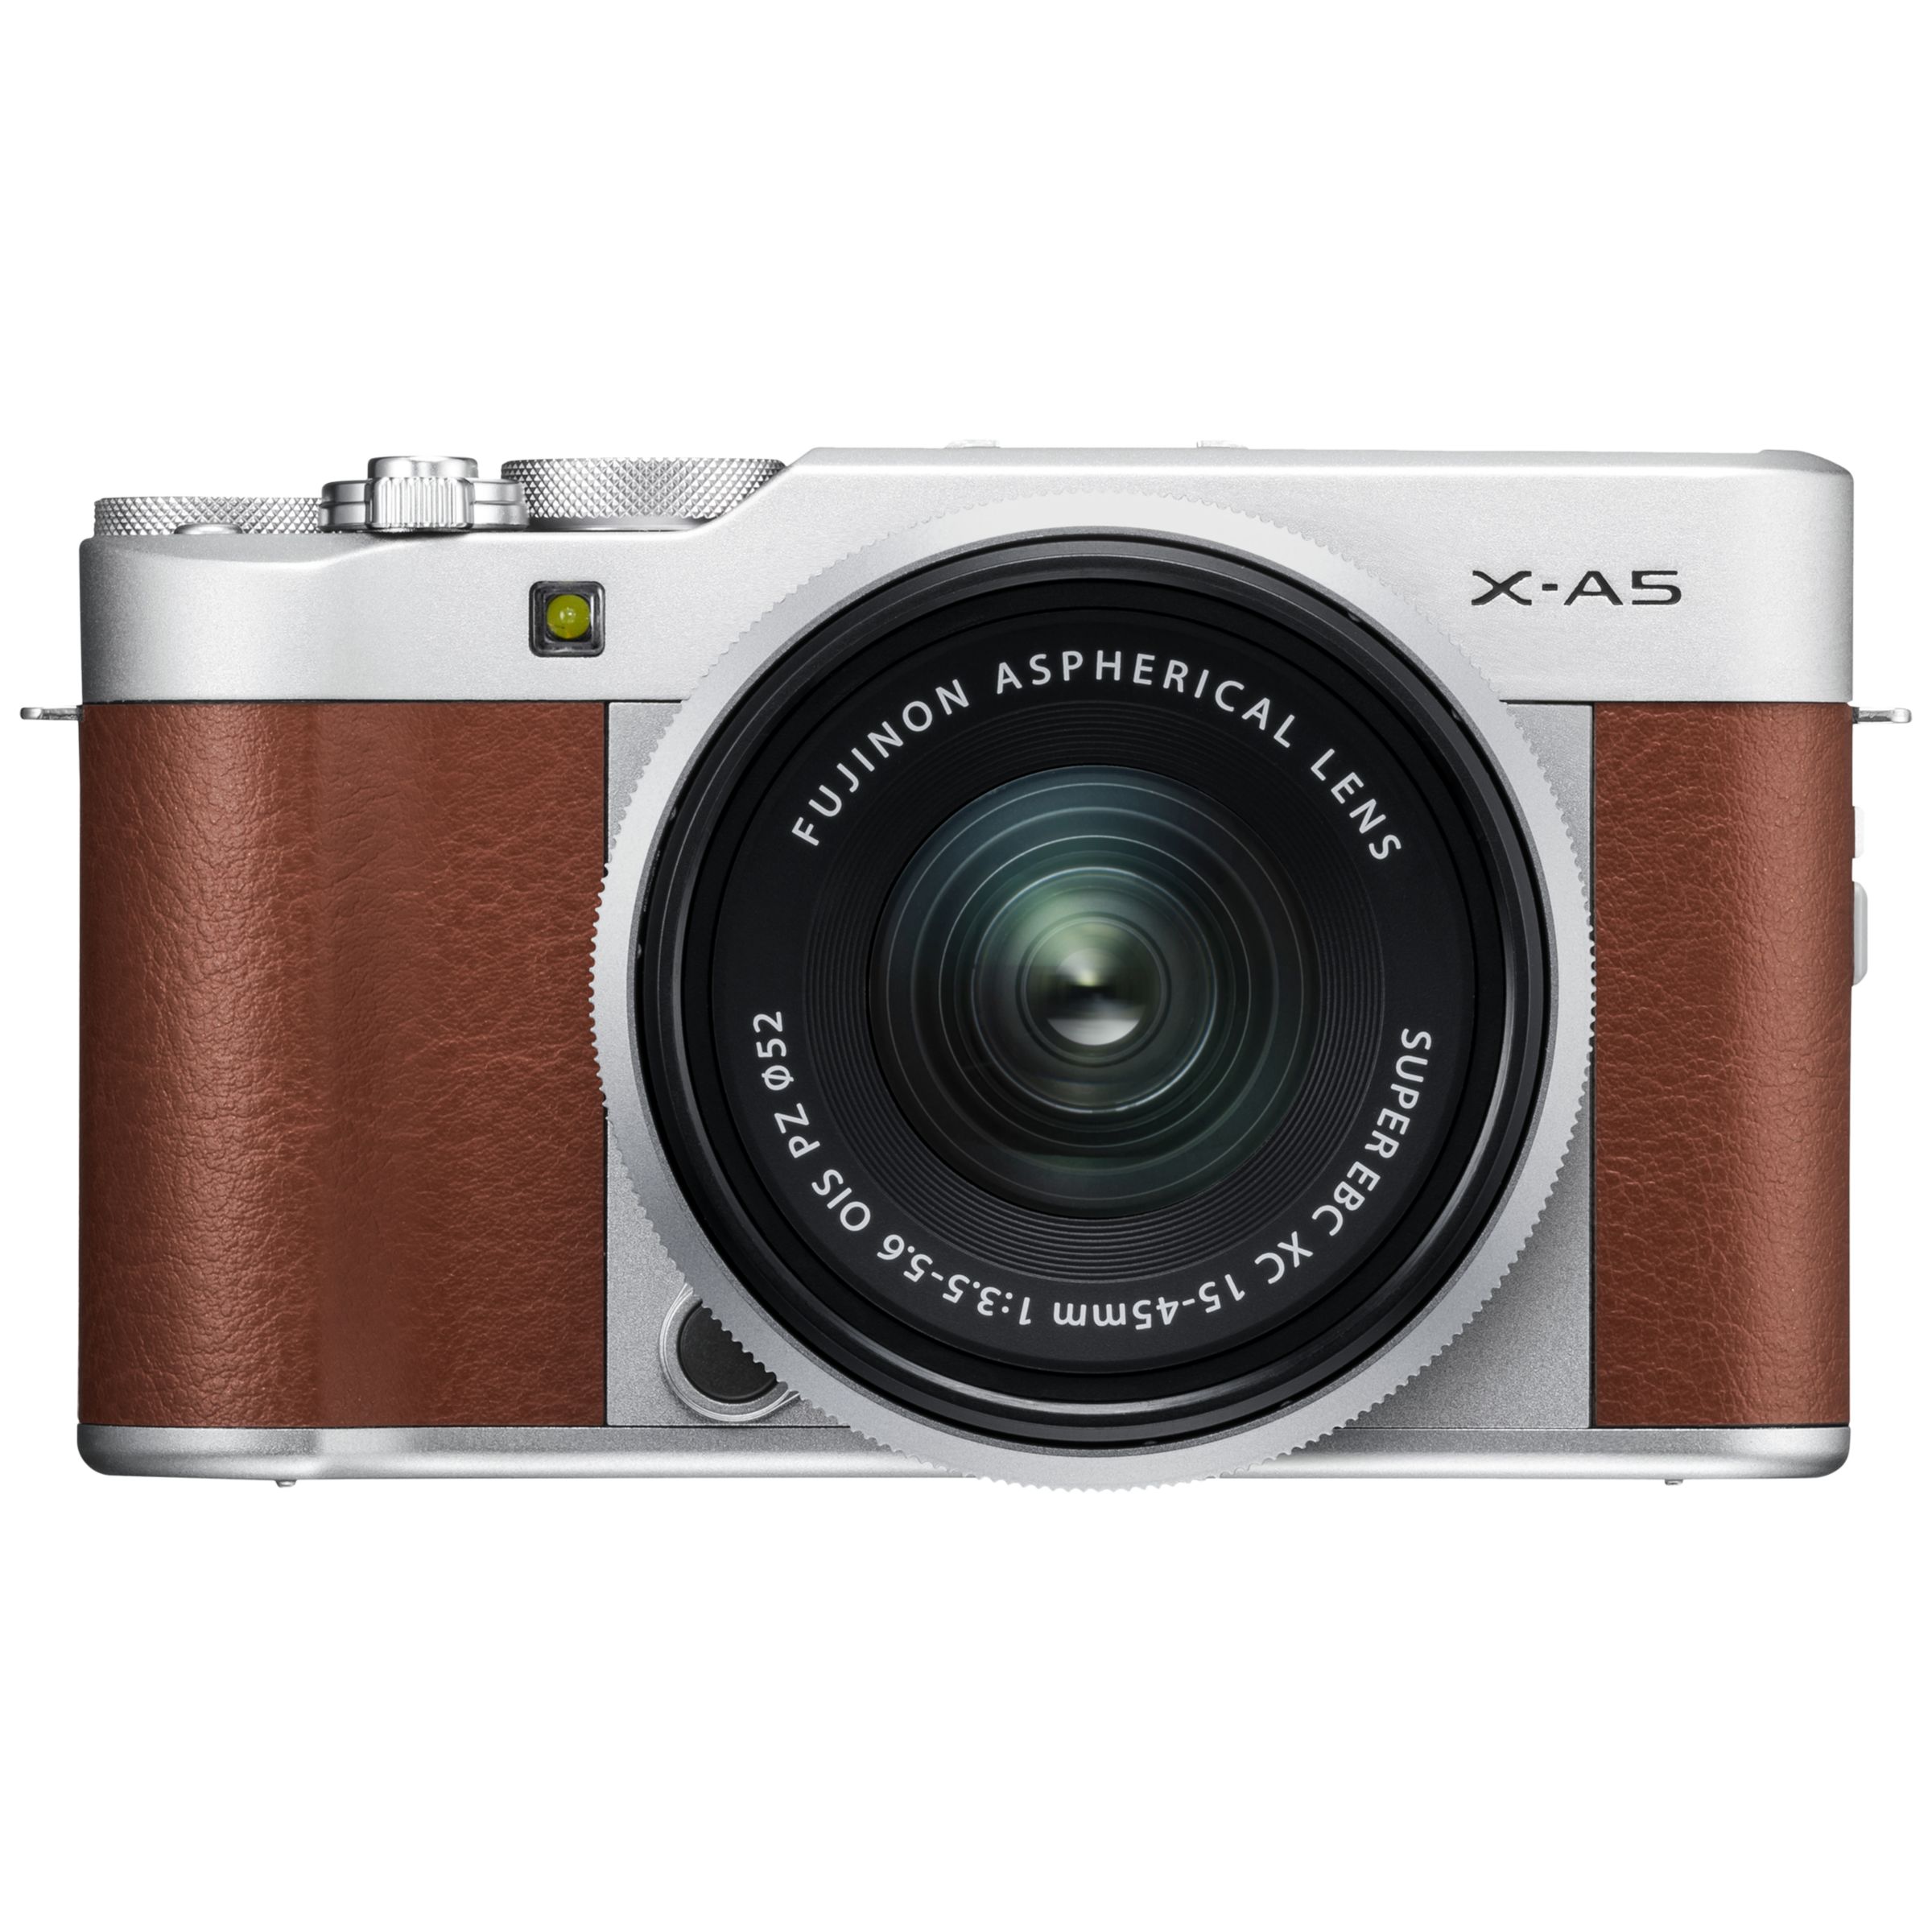 Fujifilm X-A5 Compact System Camera with XC 15-45mm OIS Lens, 4K Ultra HD, 24.2MP, Wi-Fi, Bluetooth, 3” Tiltable LCD Touch Screen